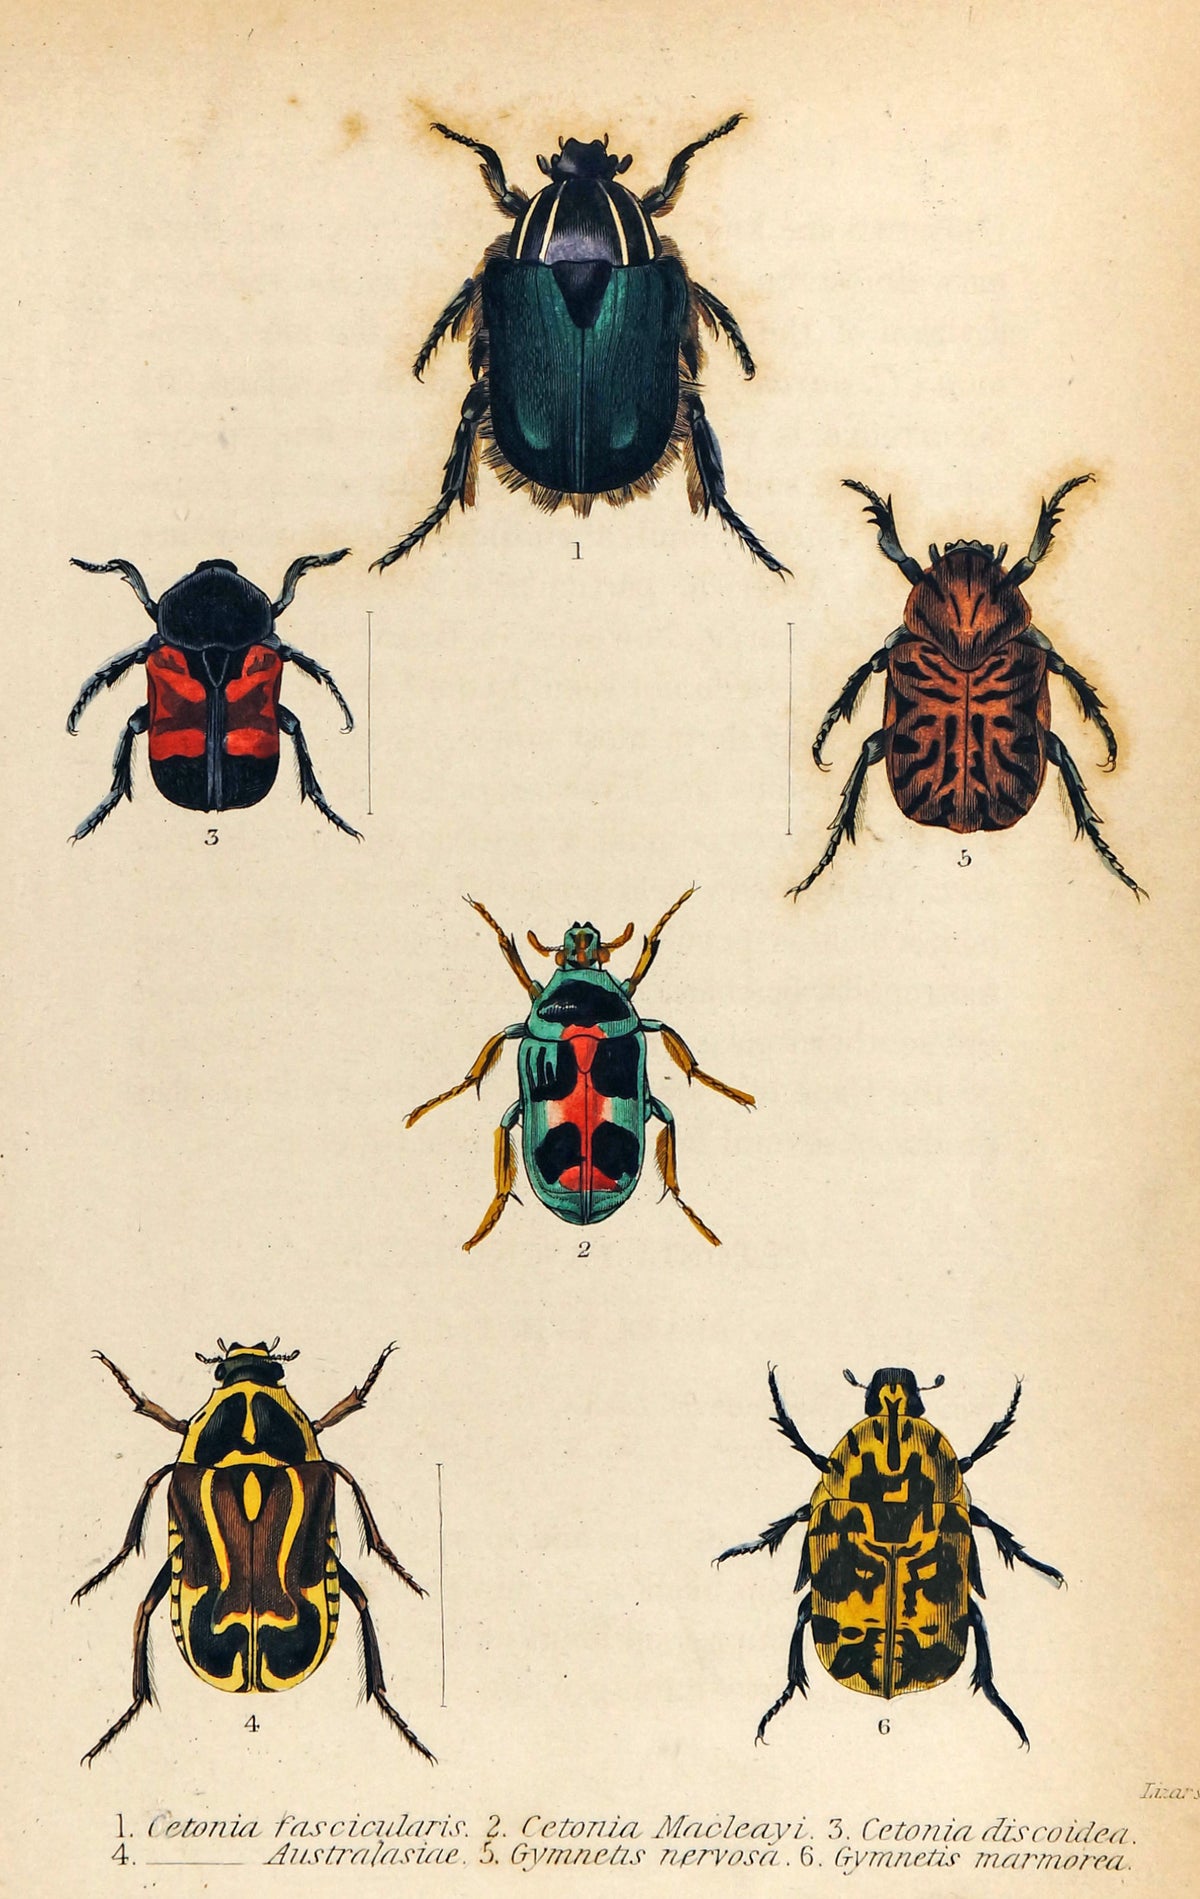 Cetonia Scarabaeidae Beetles, Hand Colored Antique Print - Authentic Vintage Poster